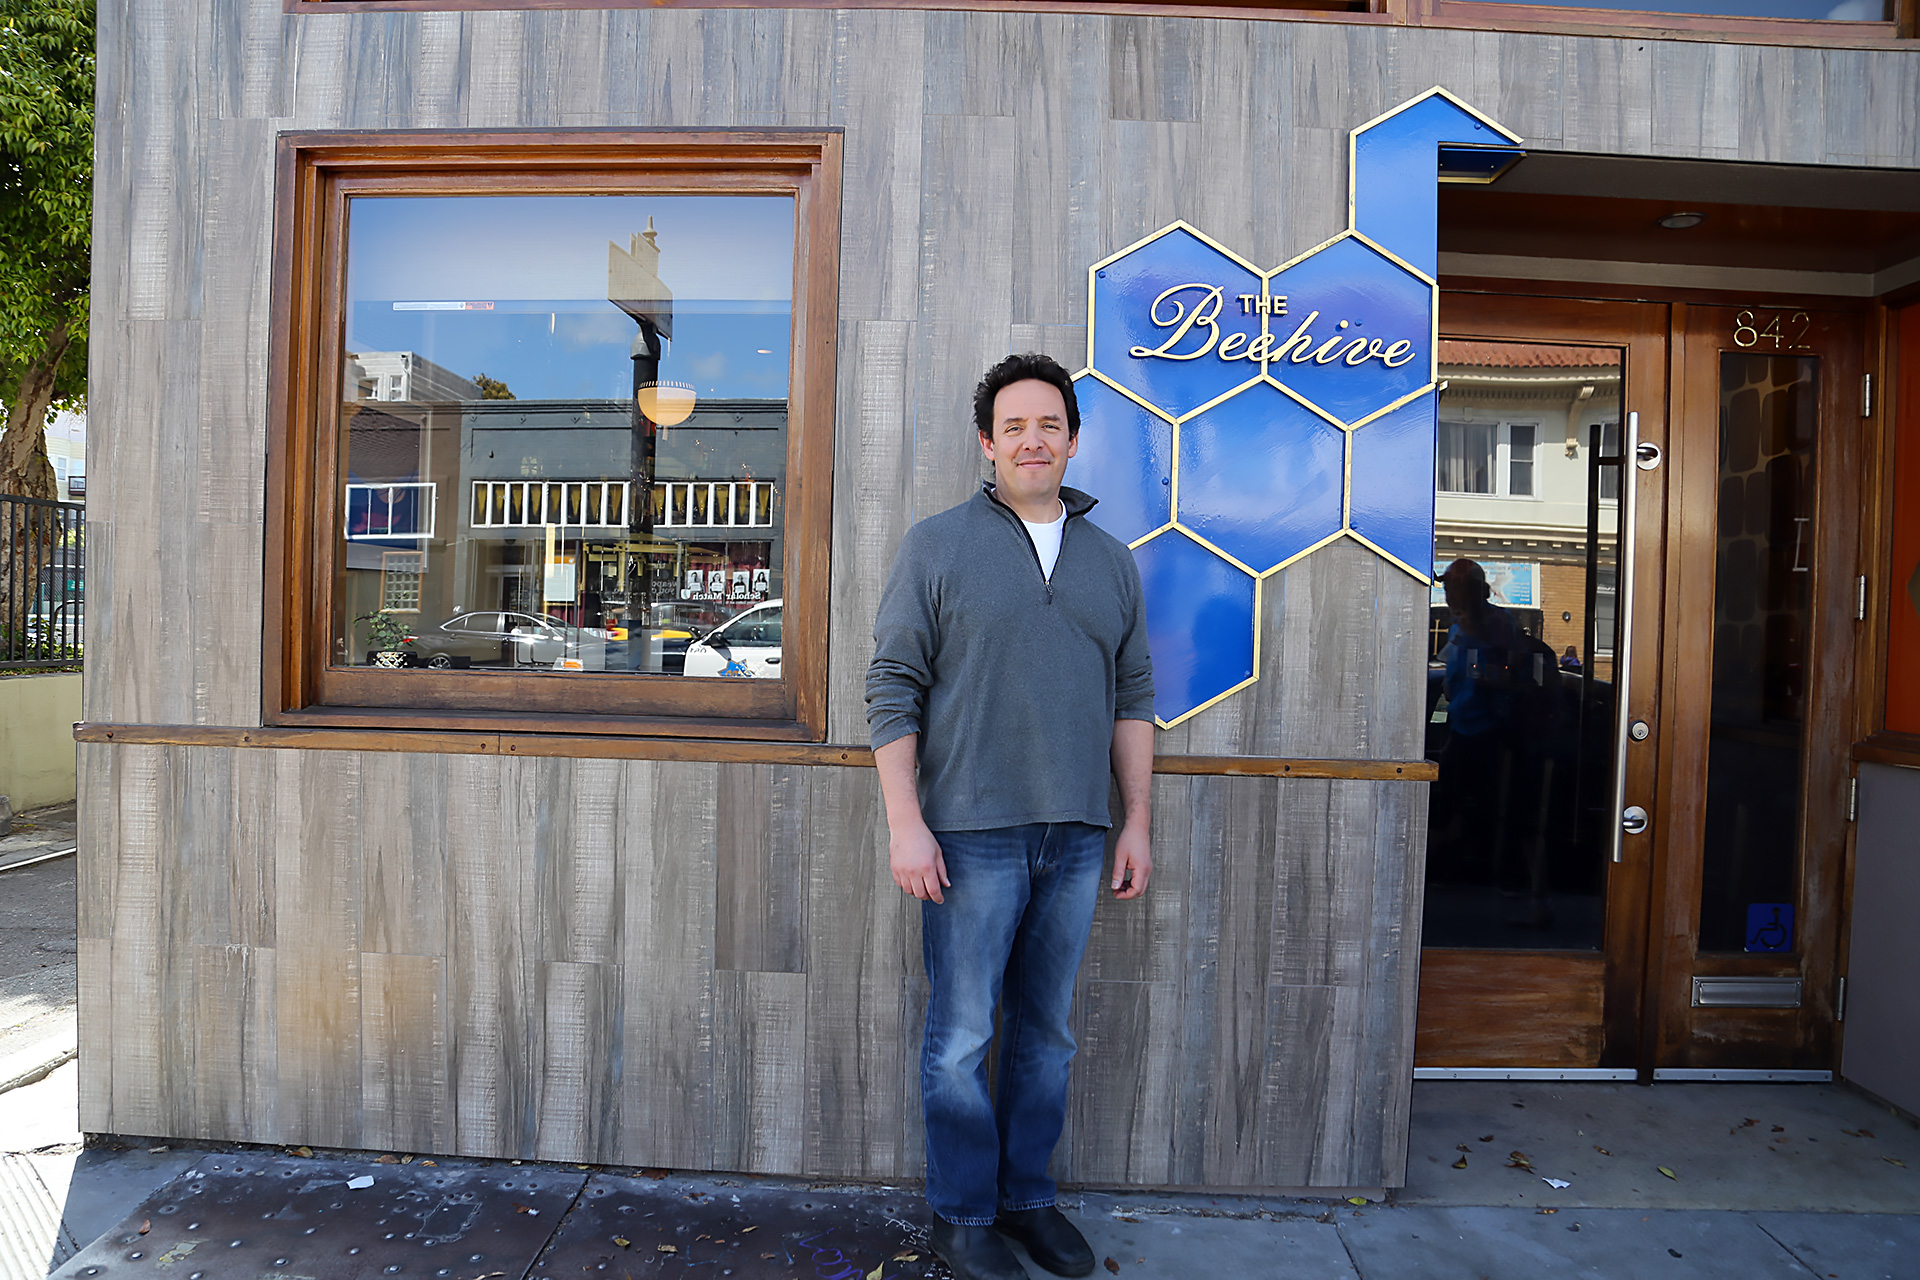 Partner/Chef Phil West in front of The Beehive